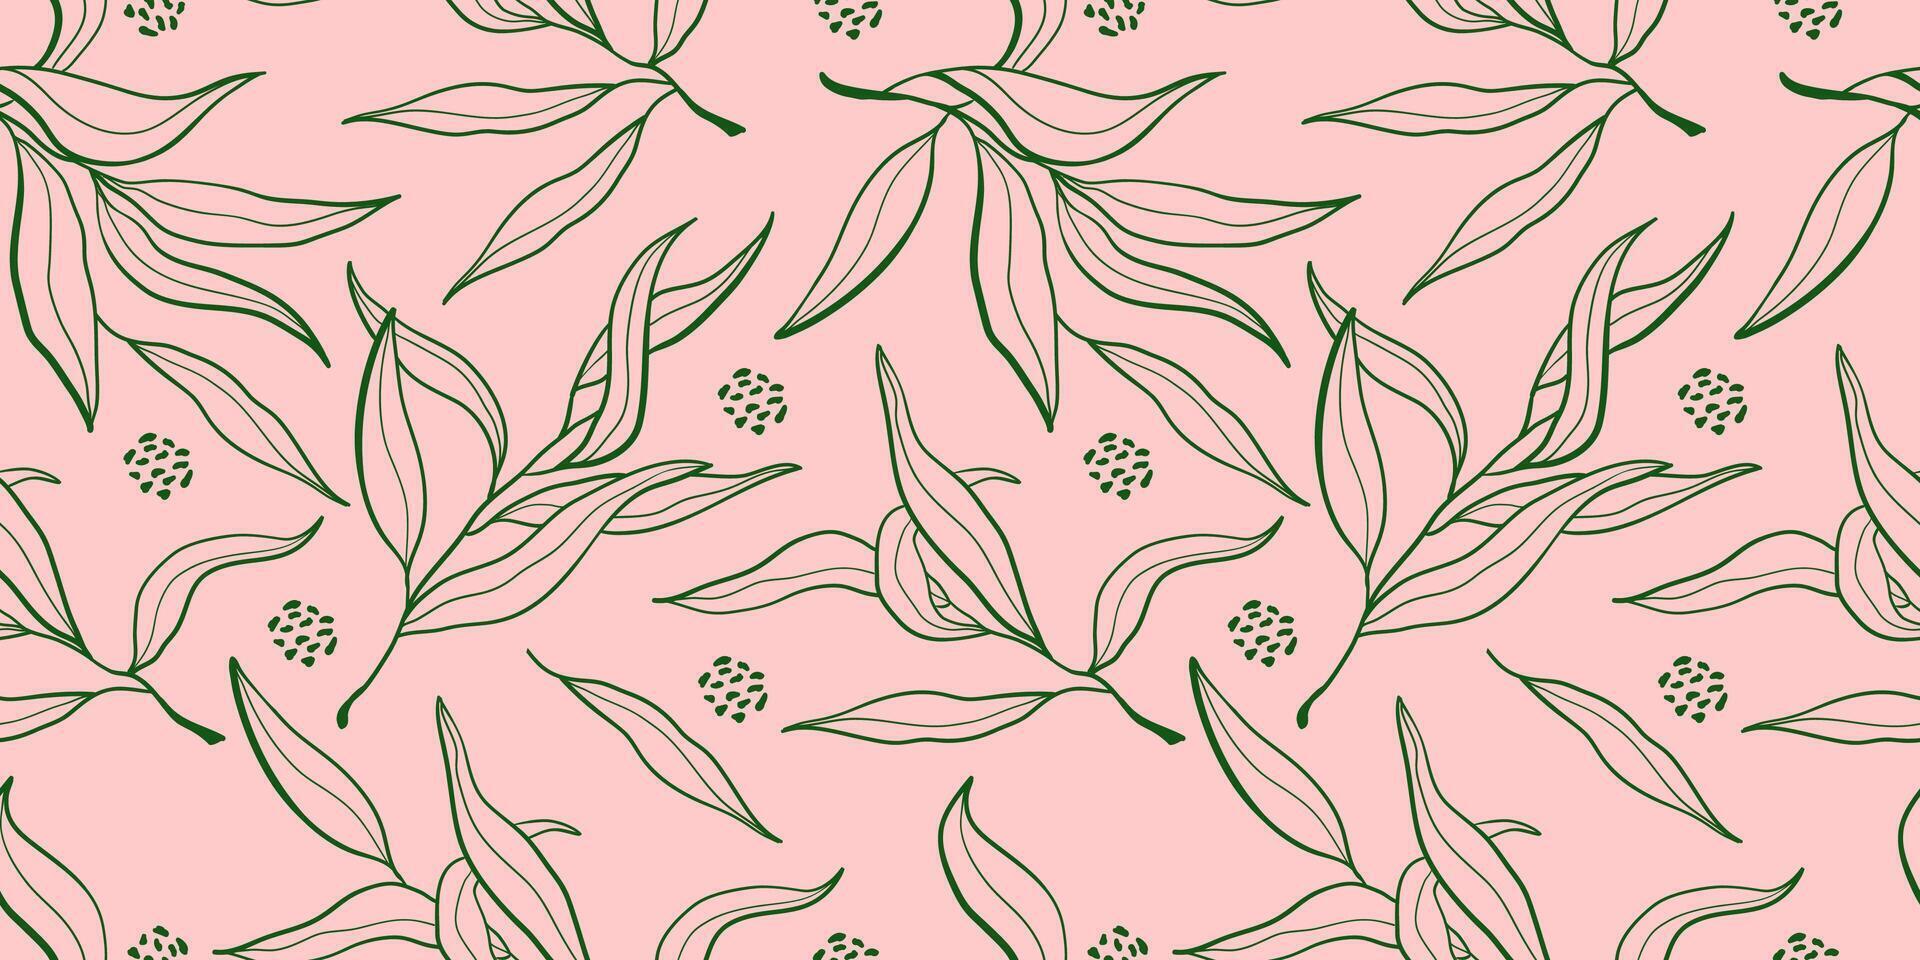 Seamless pattern with doodle green olive branch leaves. Vector hand drawn nature background illustration.